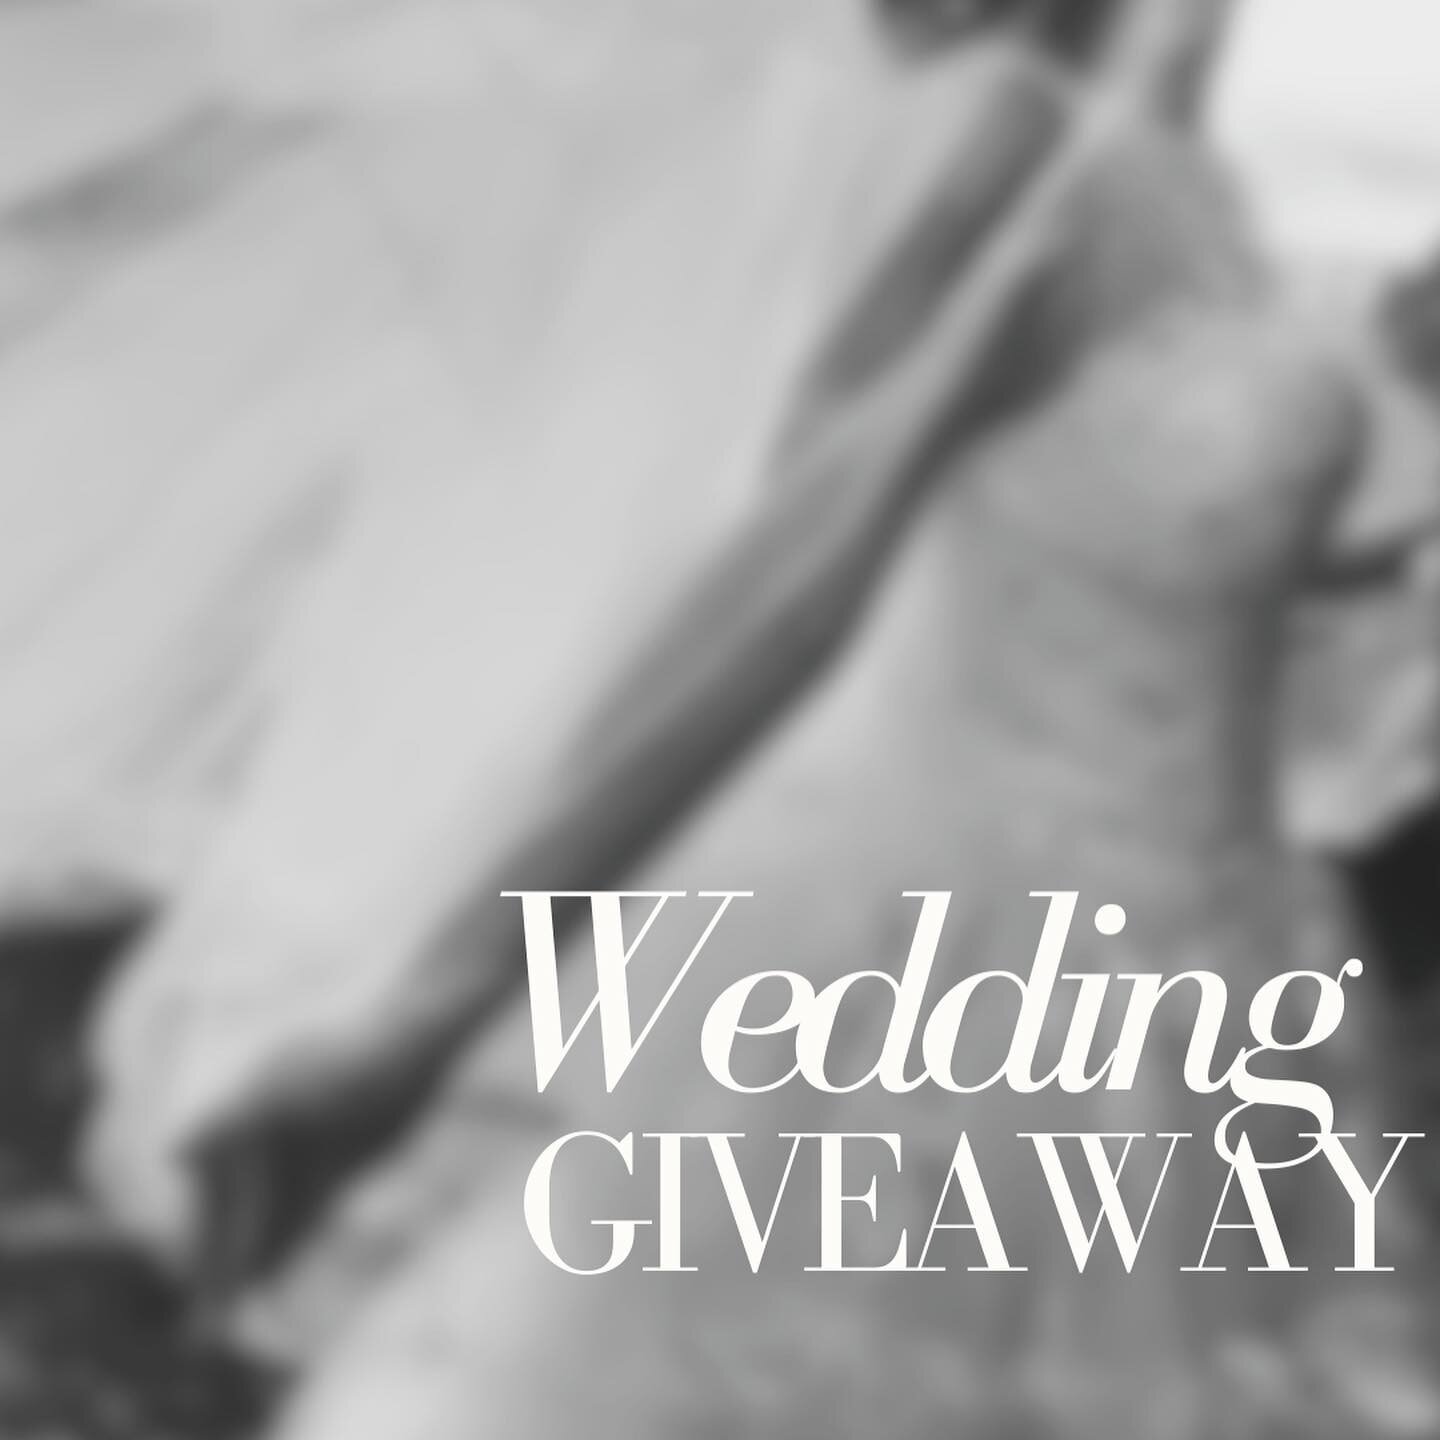 TIS THE SEASON - WEDDING GIVEAWAY.  Enter to win candles for your special event. Doesn&rsquo;t necessarily have to be your wedding, could be your shower, birthday, baby shower. Any special event! 

What you&rsquo;ll win? 50 of our select favor select